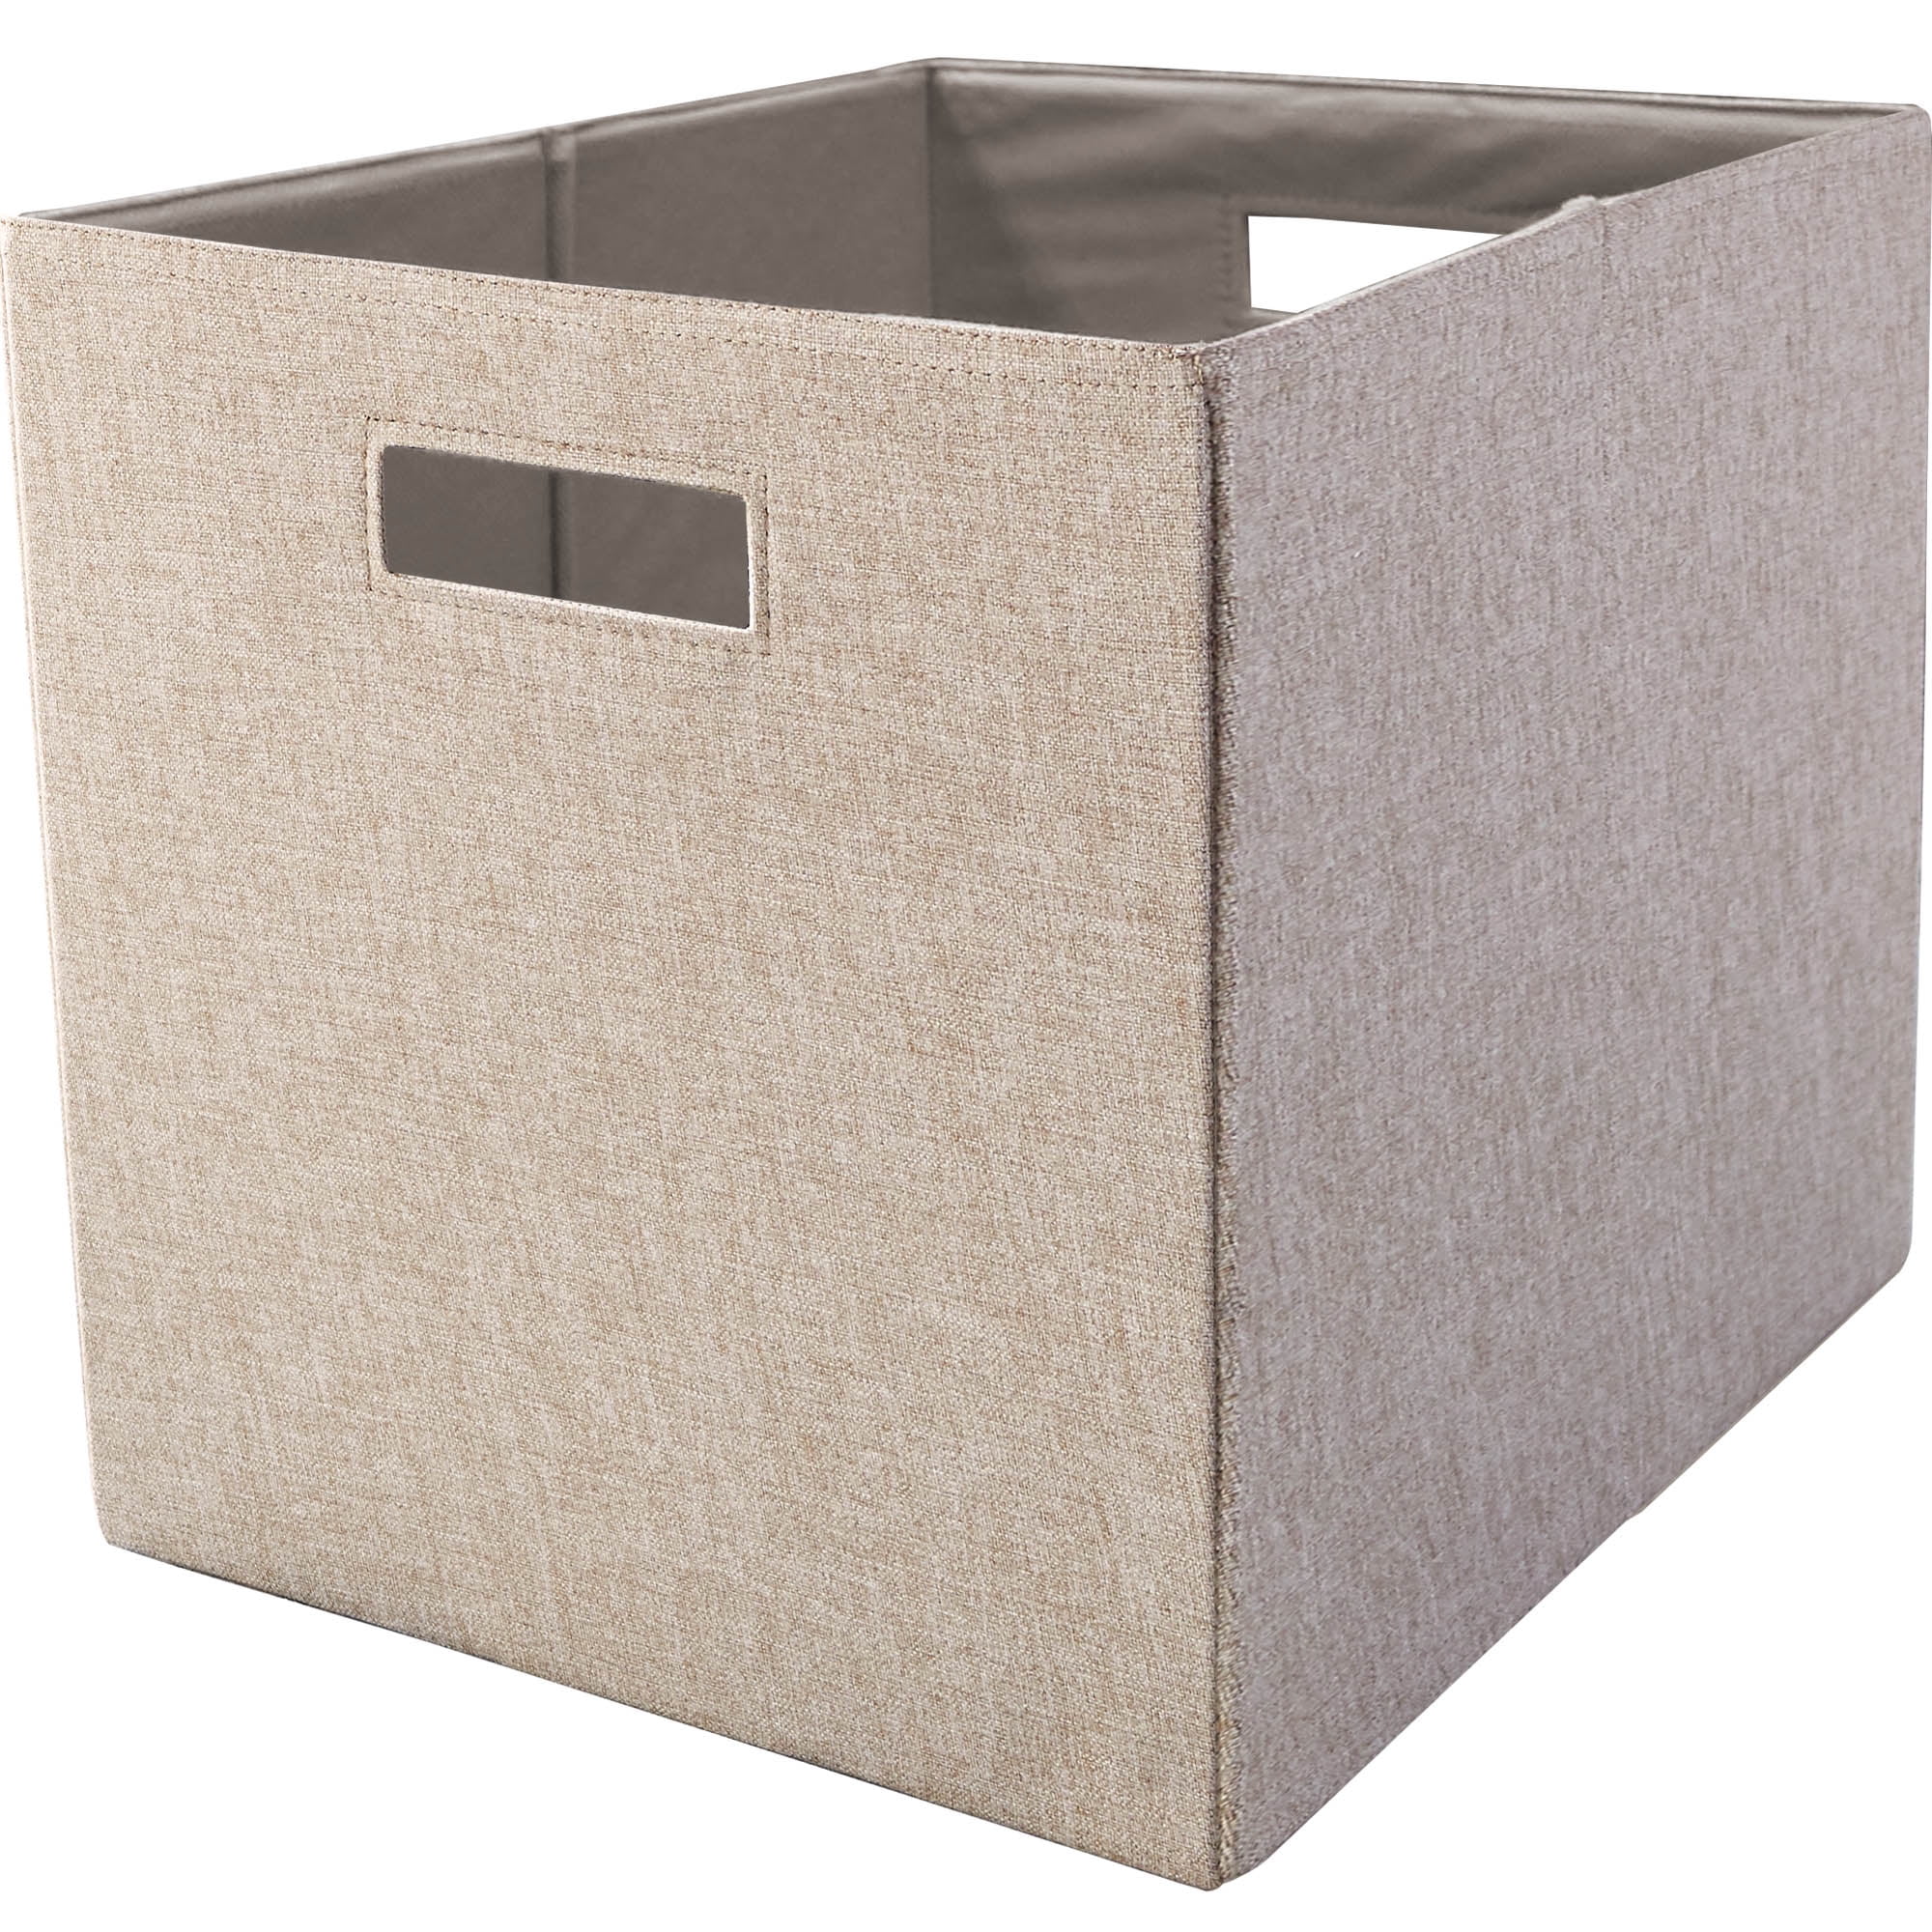 Cubed Storage Boxes 